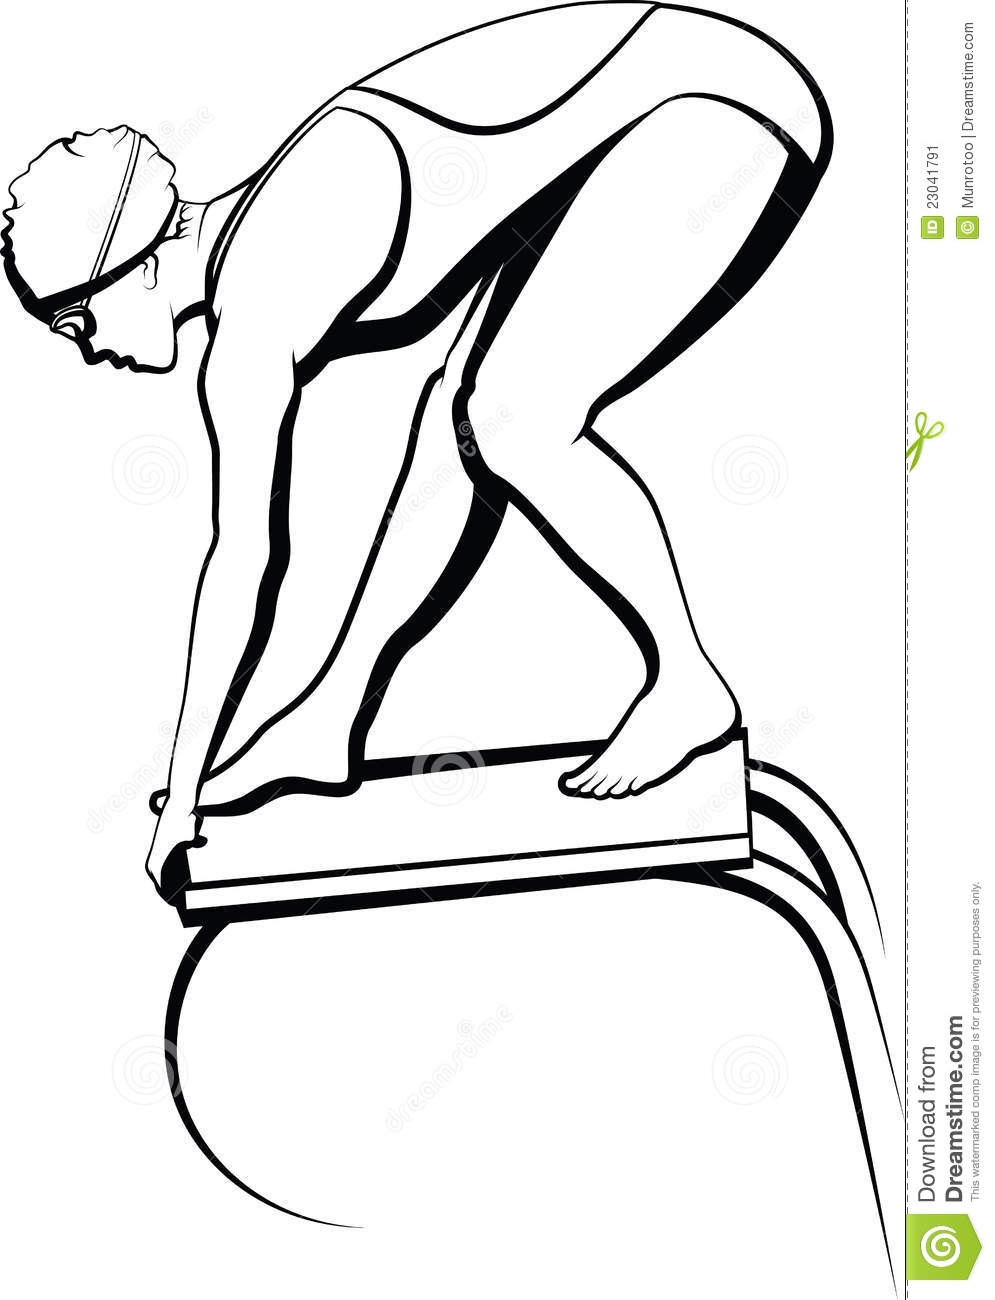 Swimming Cartoon Black And White Clipart#2099397.